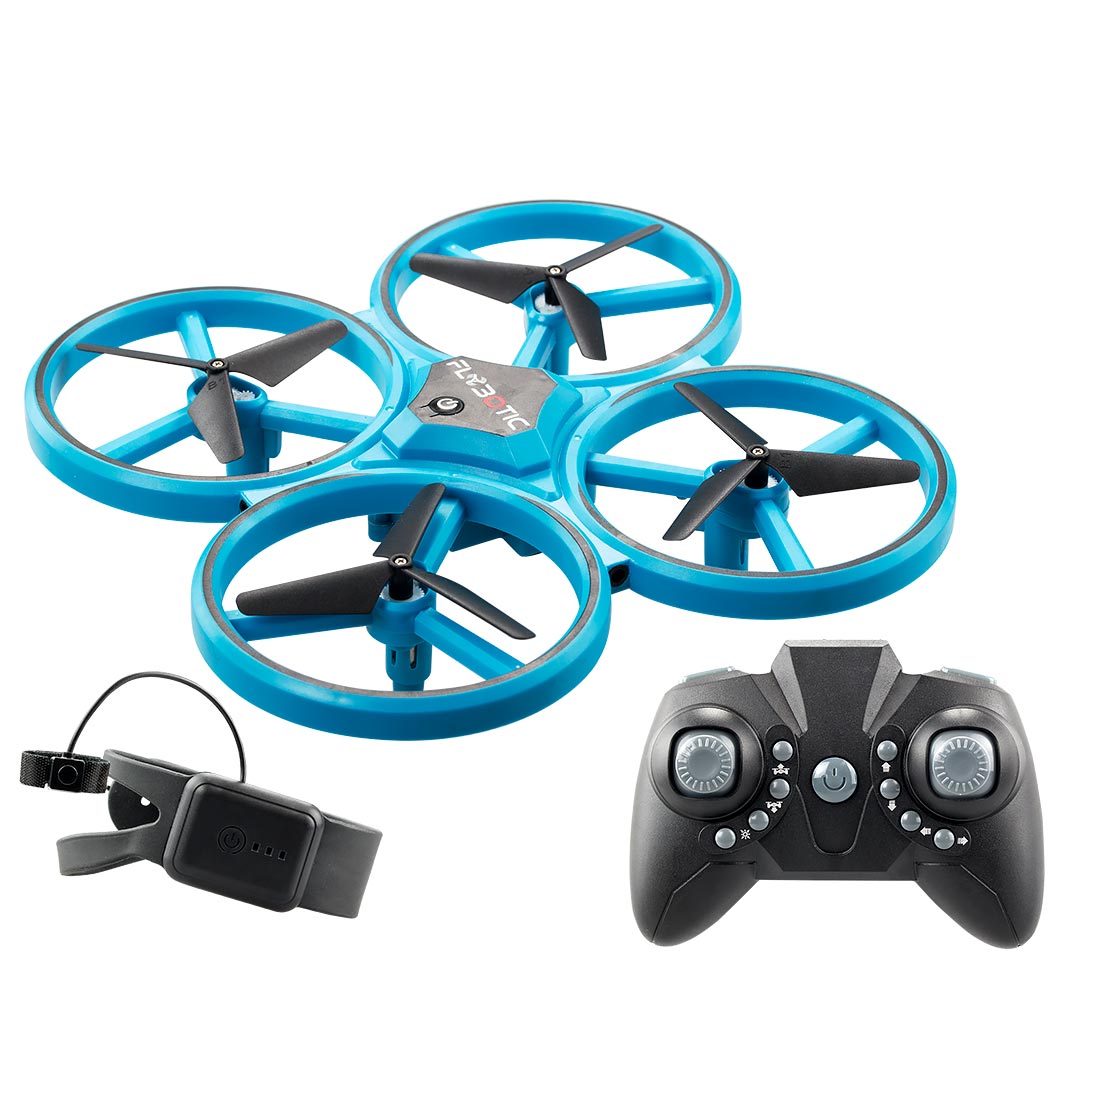 Flybotic Flashing Drone Silverlit d'occasion - KIDIBAM